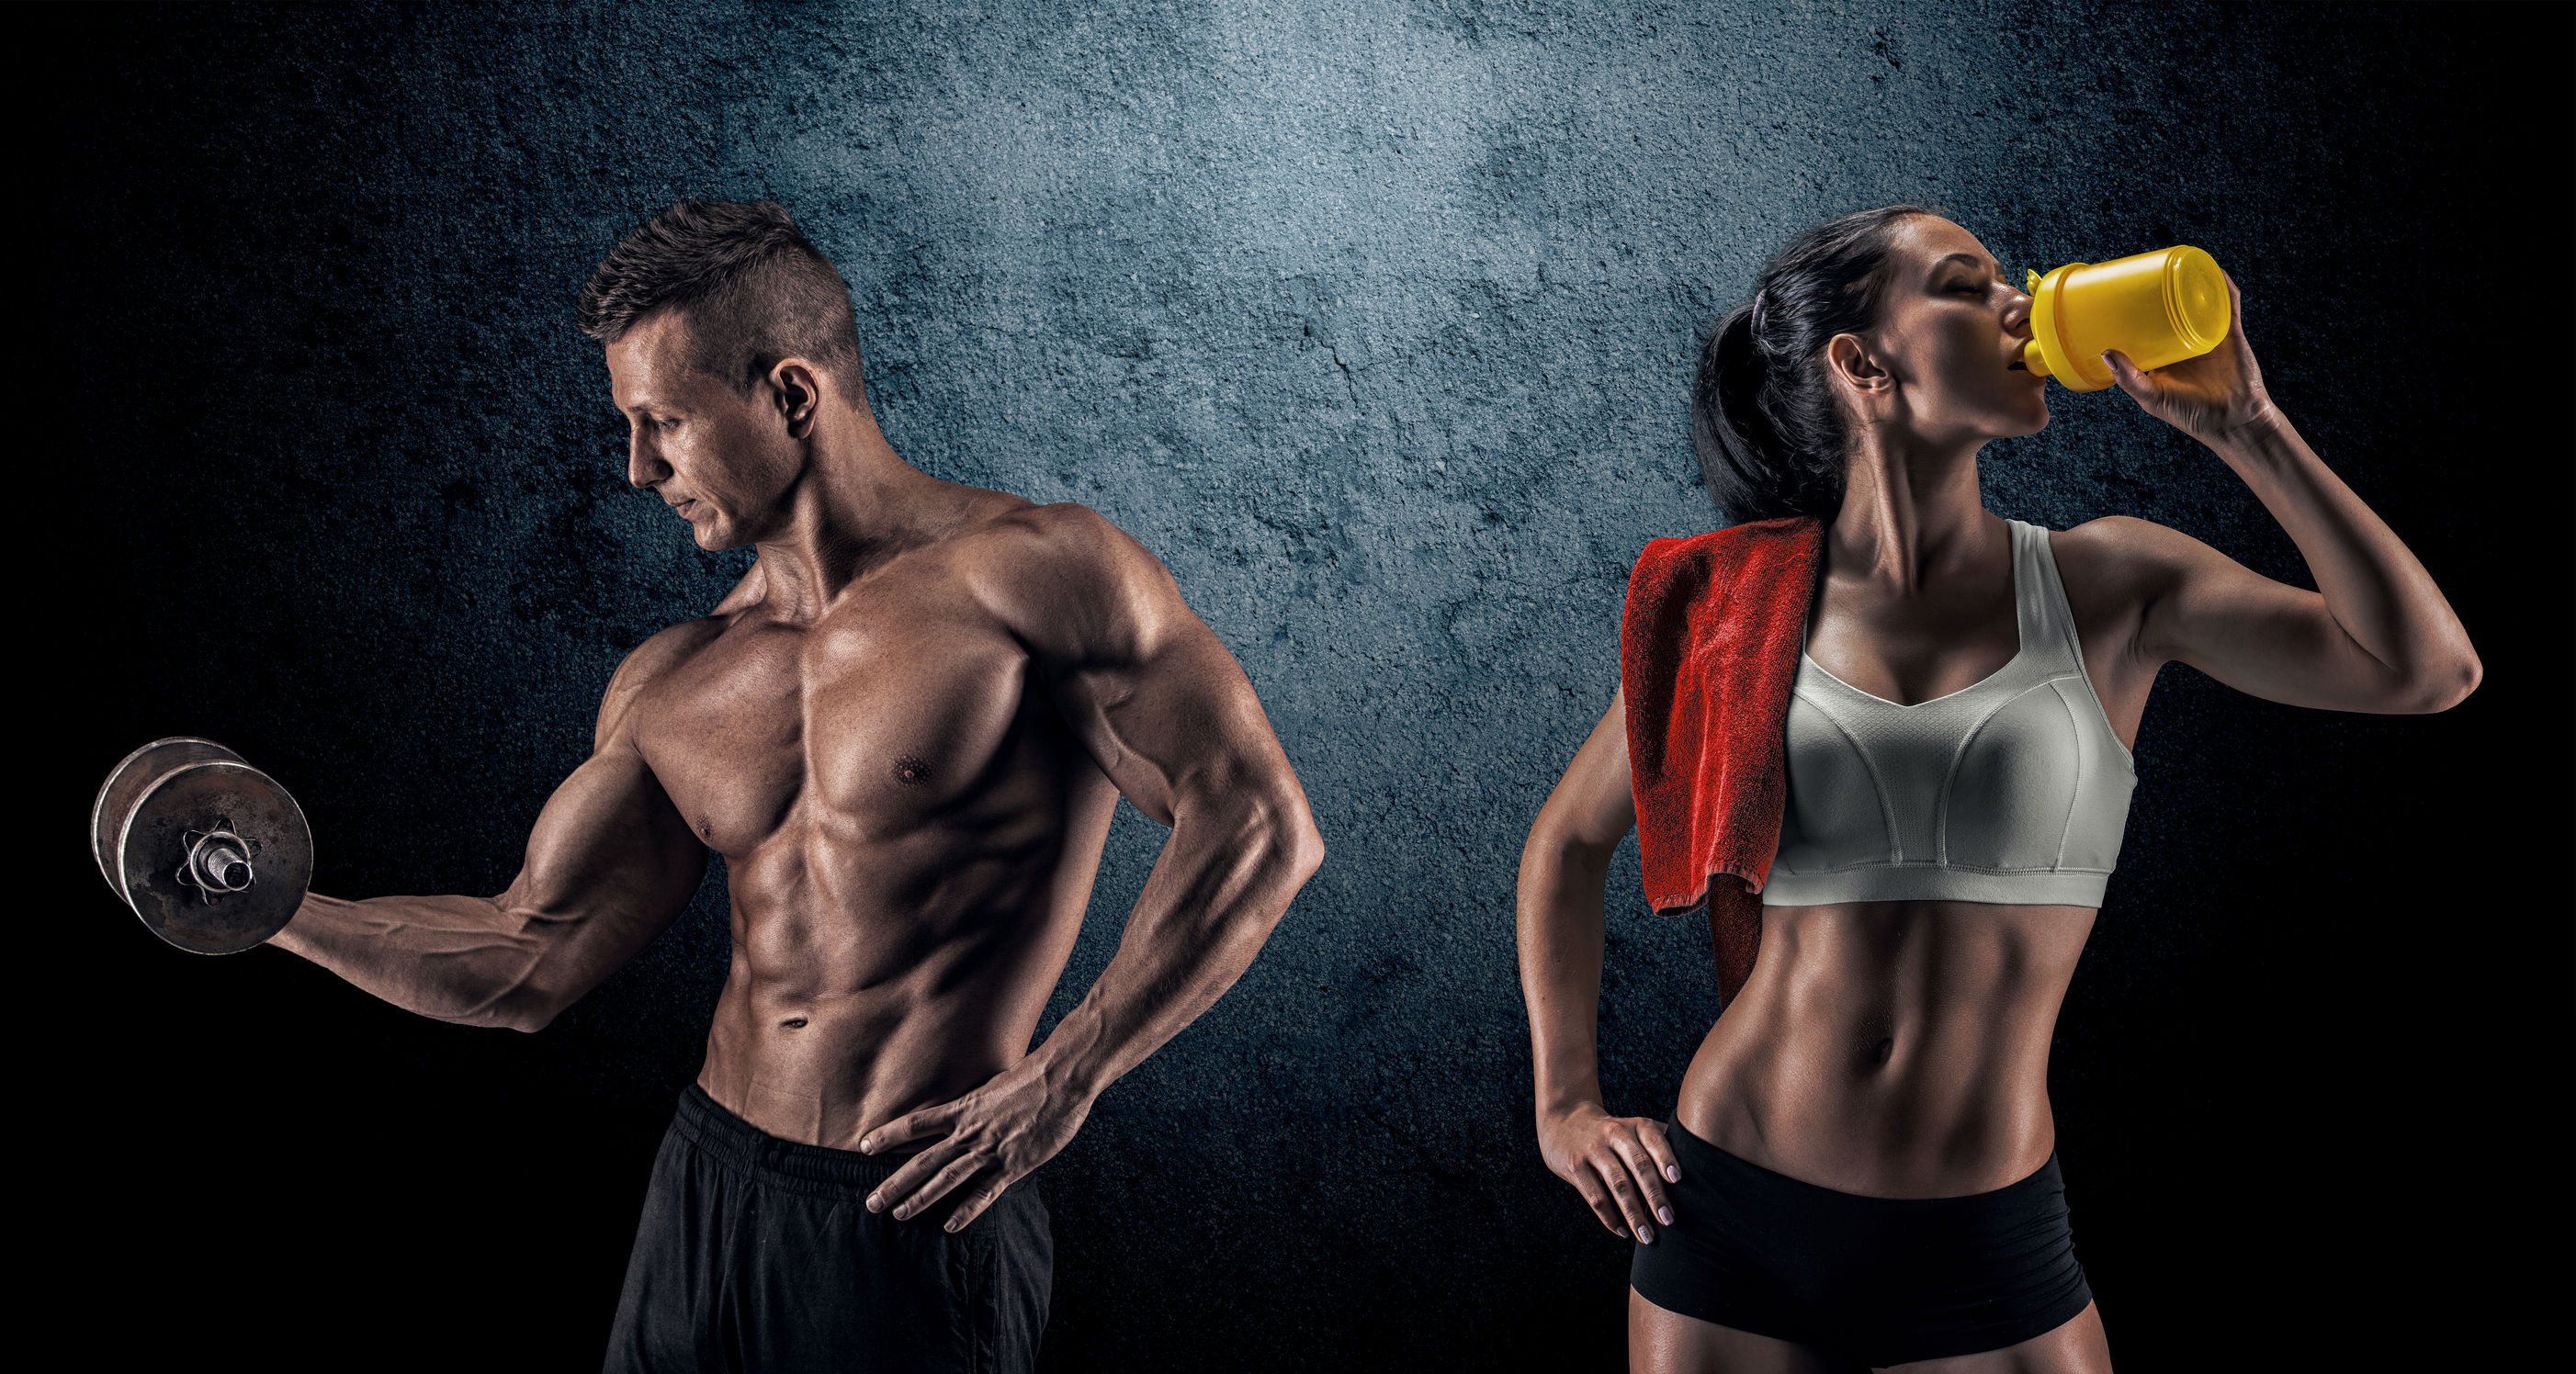 44310986 - bodybuilding. strong man and a woman posing on a dark background